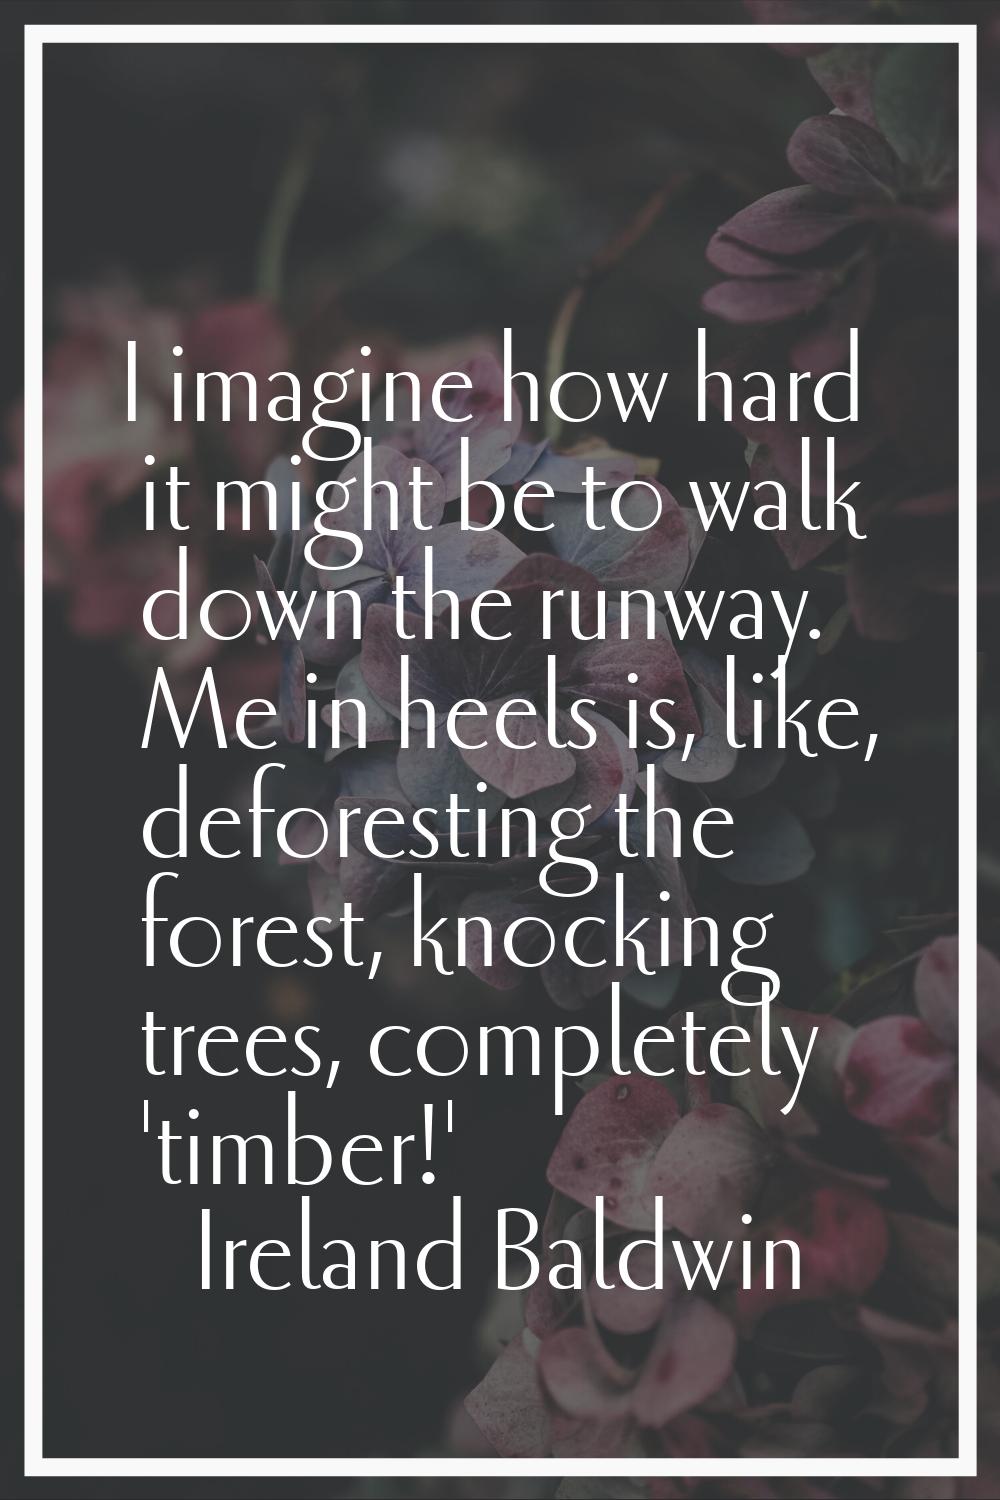 I imagine how hard it might be to walk down the runway. Me in heels is, like, deforesting the fores